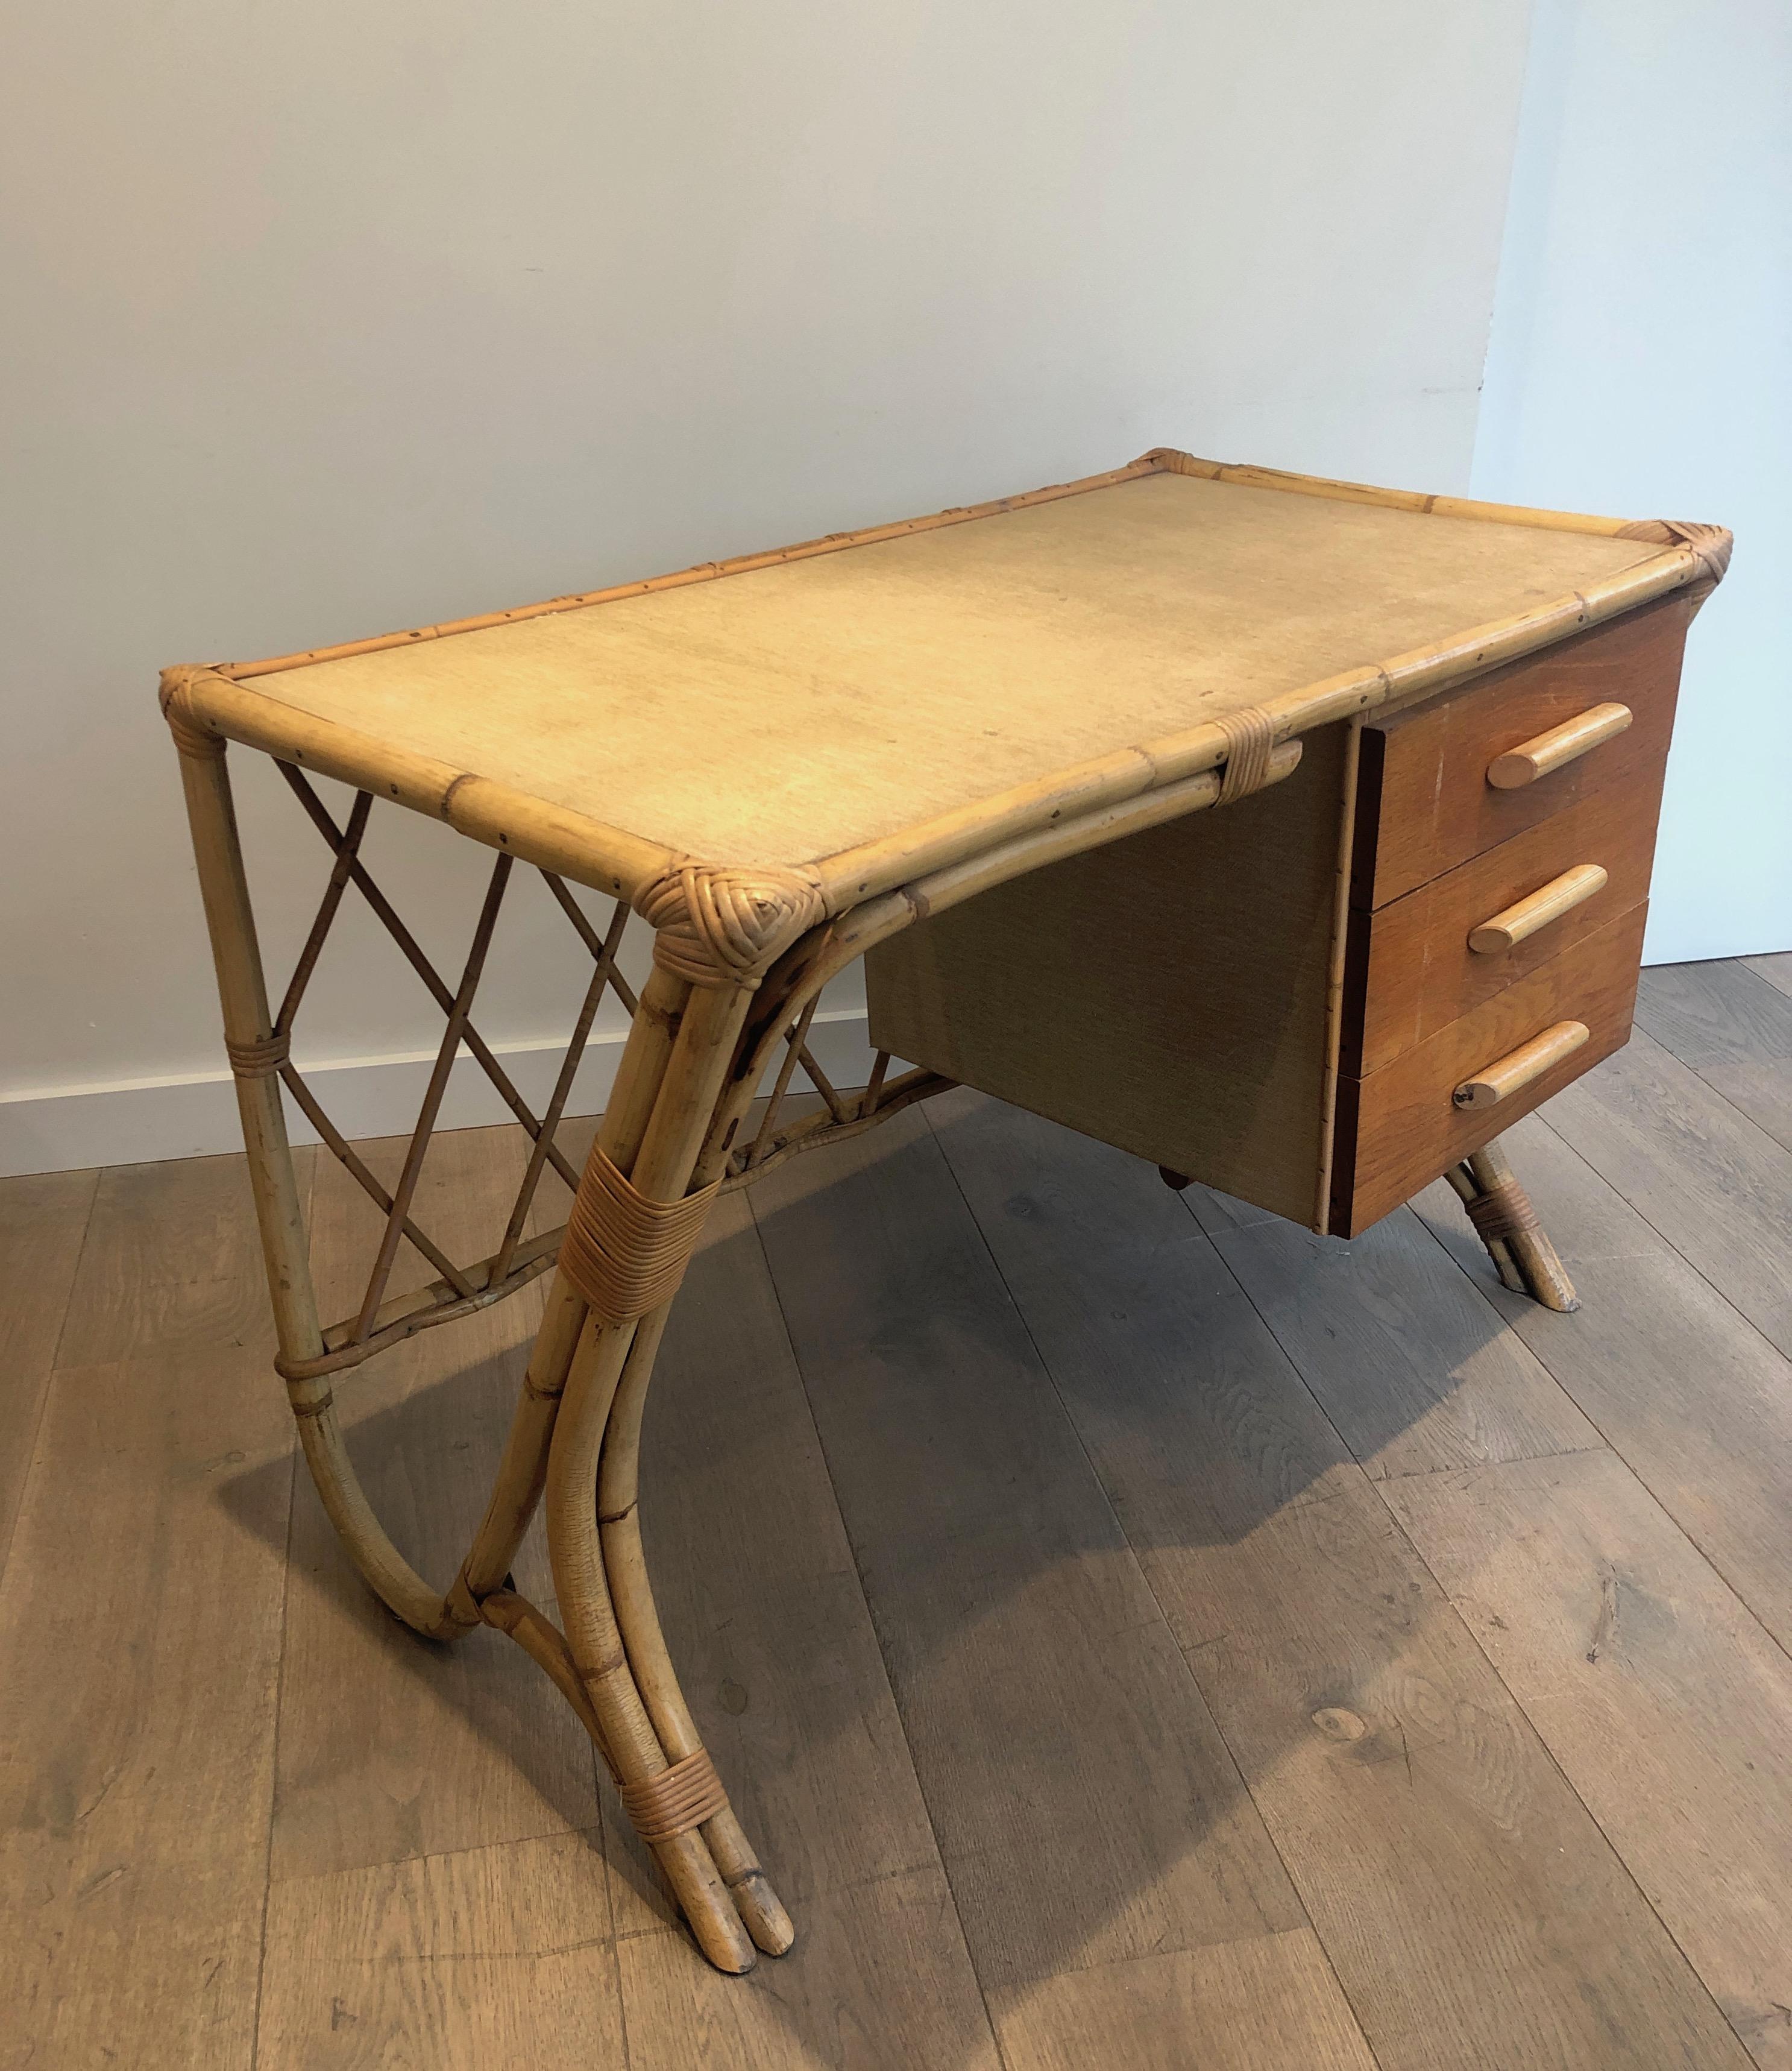 This nice design desk is made of wood and rattan. This is a nice work attributed to famous French designer Audoux Minet, circa 1970.